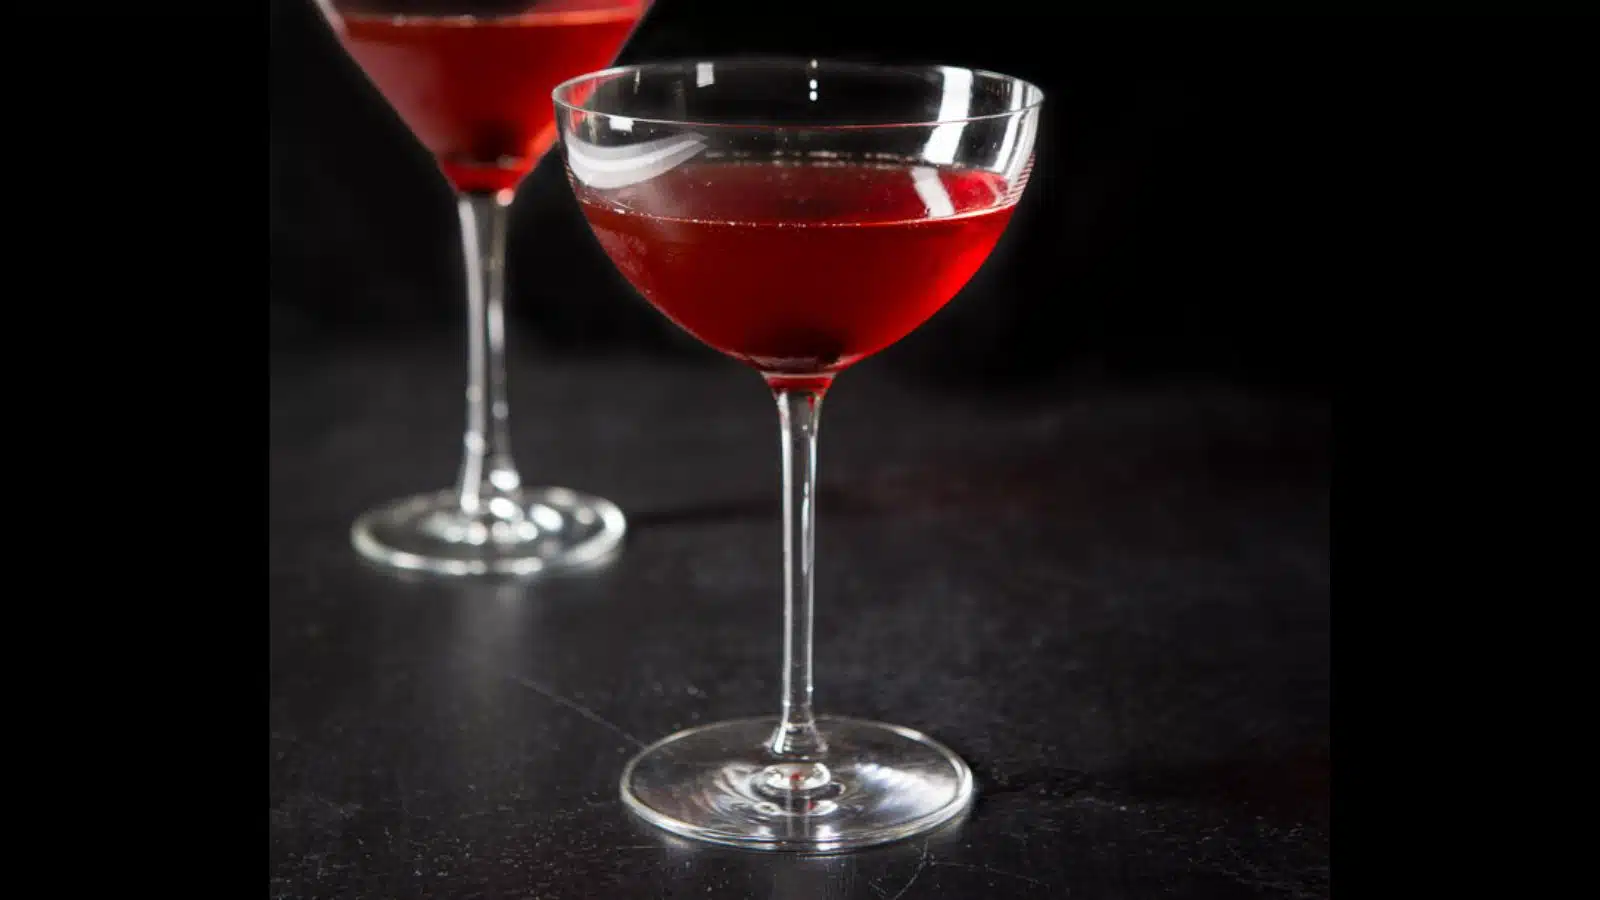 Two martini glasses filled with the Manhattan with a cherry in the glass